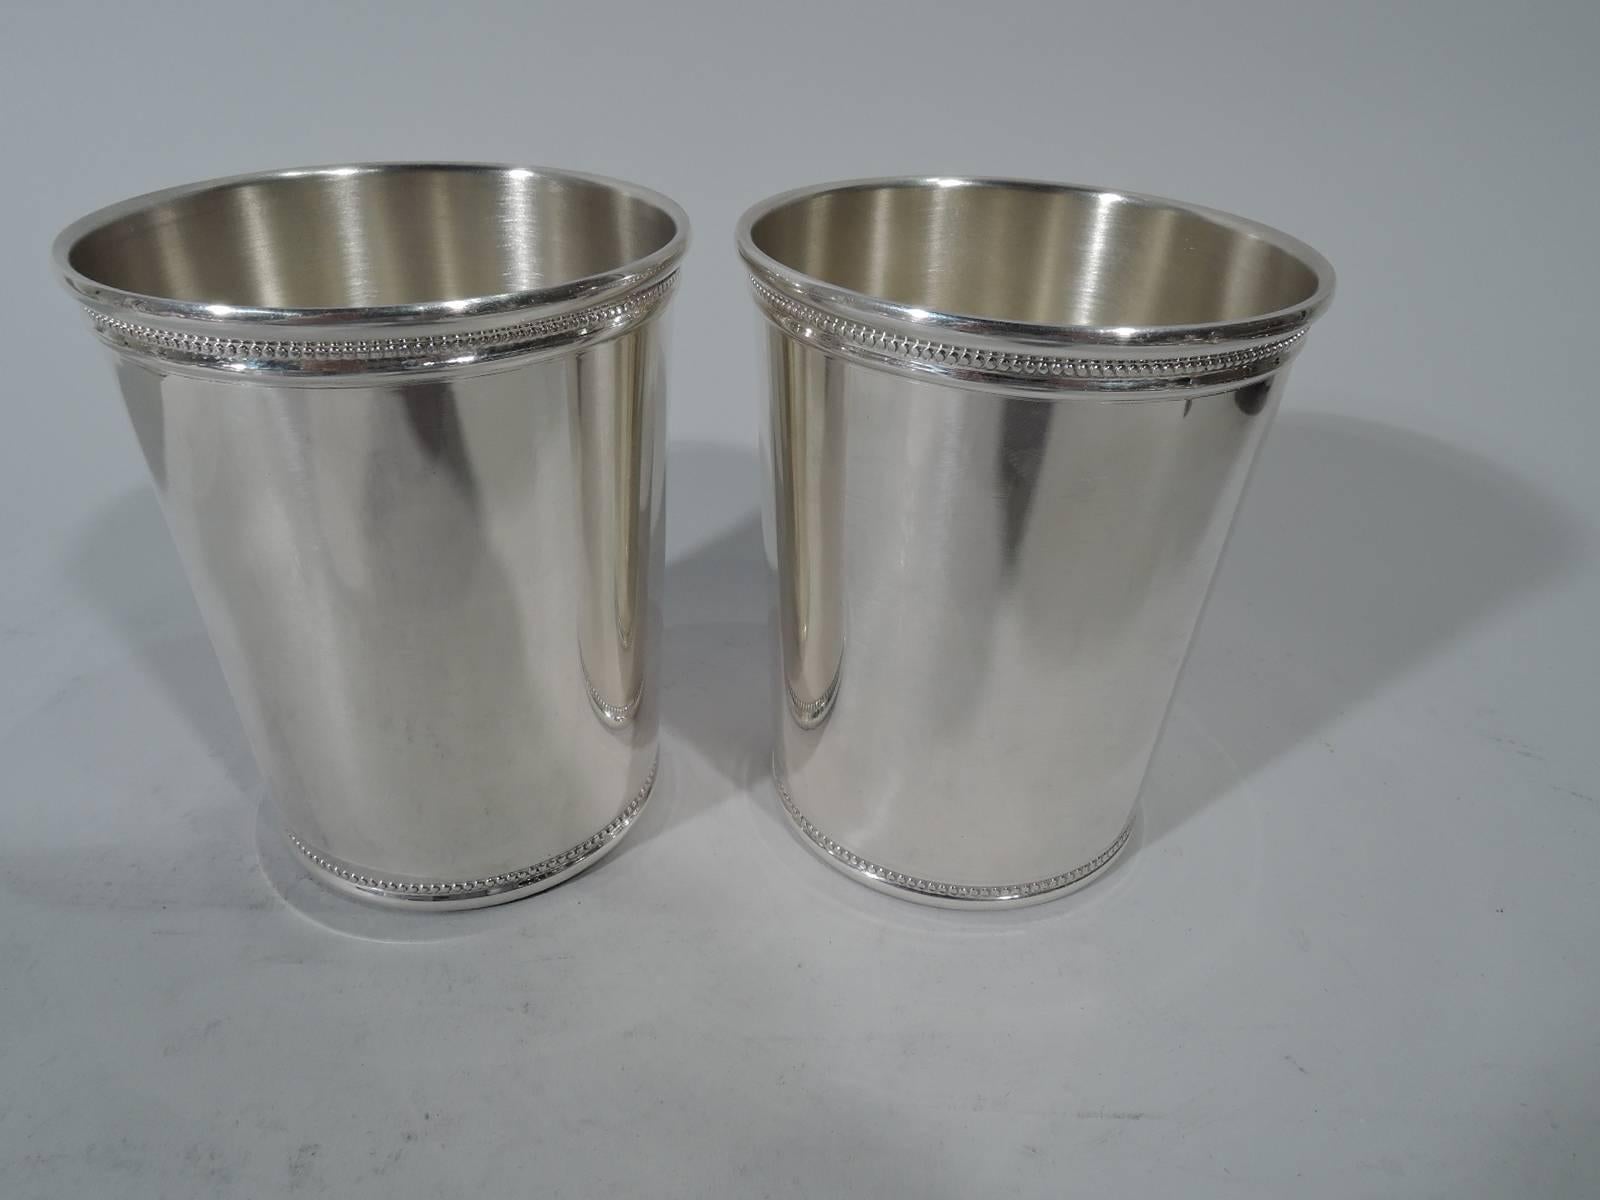 Set of four sterling silver mint julep cups. Retailed by Tiffany & Co. in New York. Straight and tapering sides and beaded rims. Hallmarked. Total weight: 19 troy ounces.